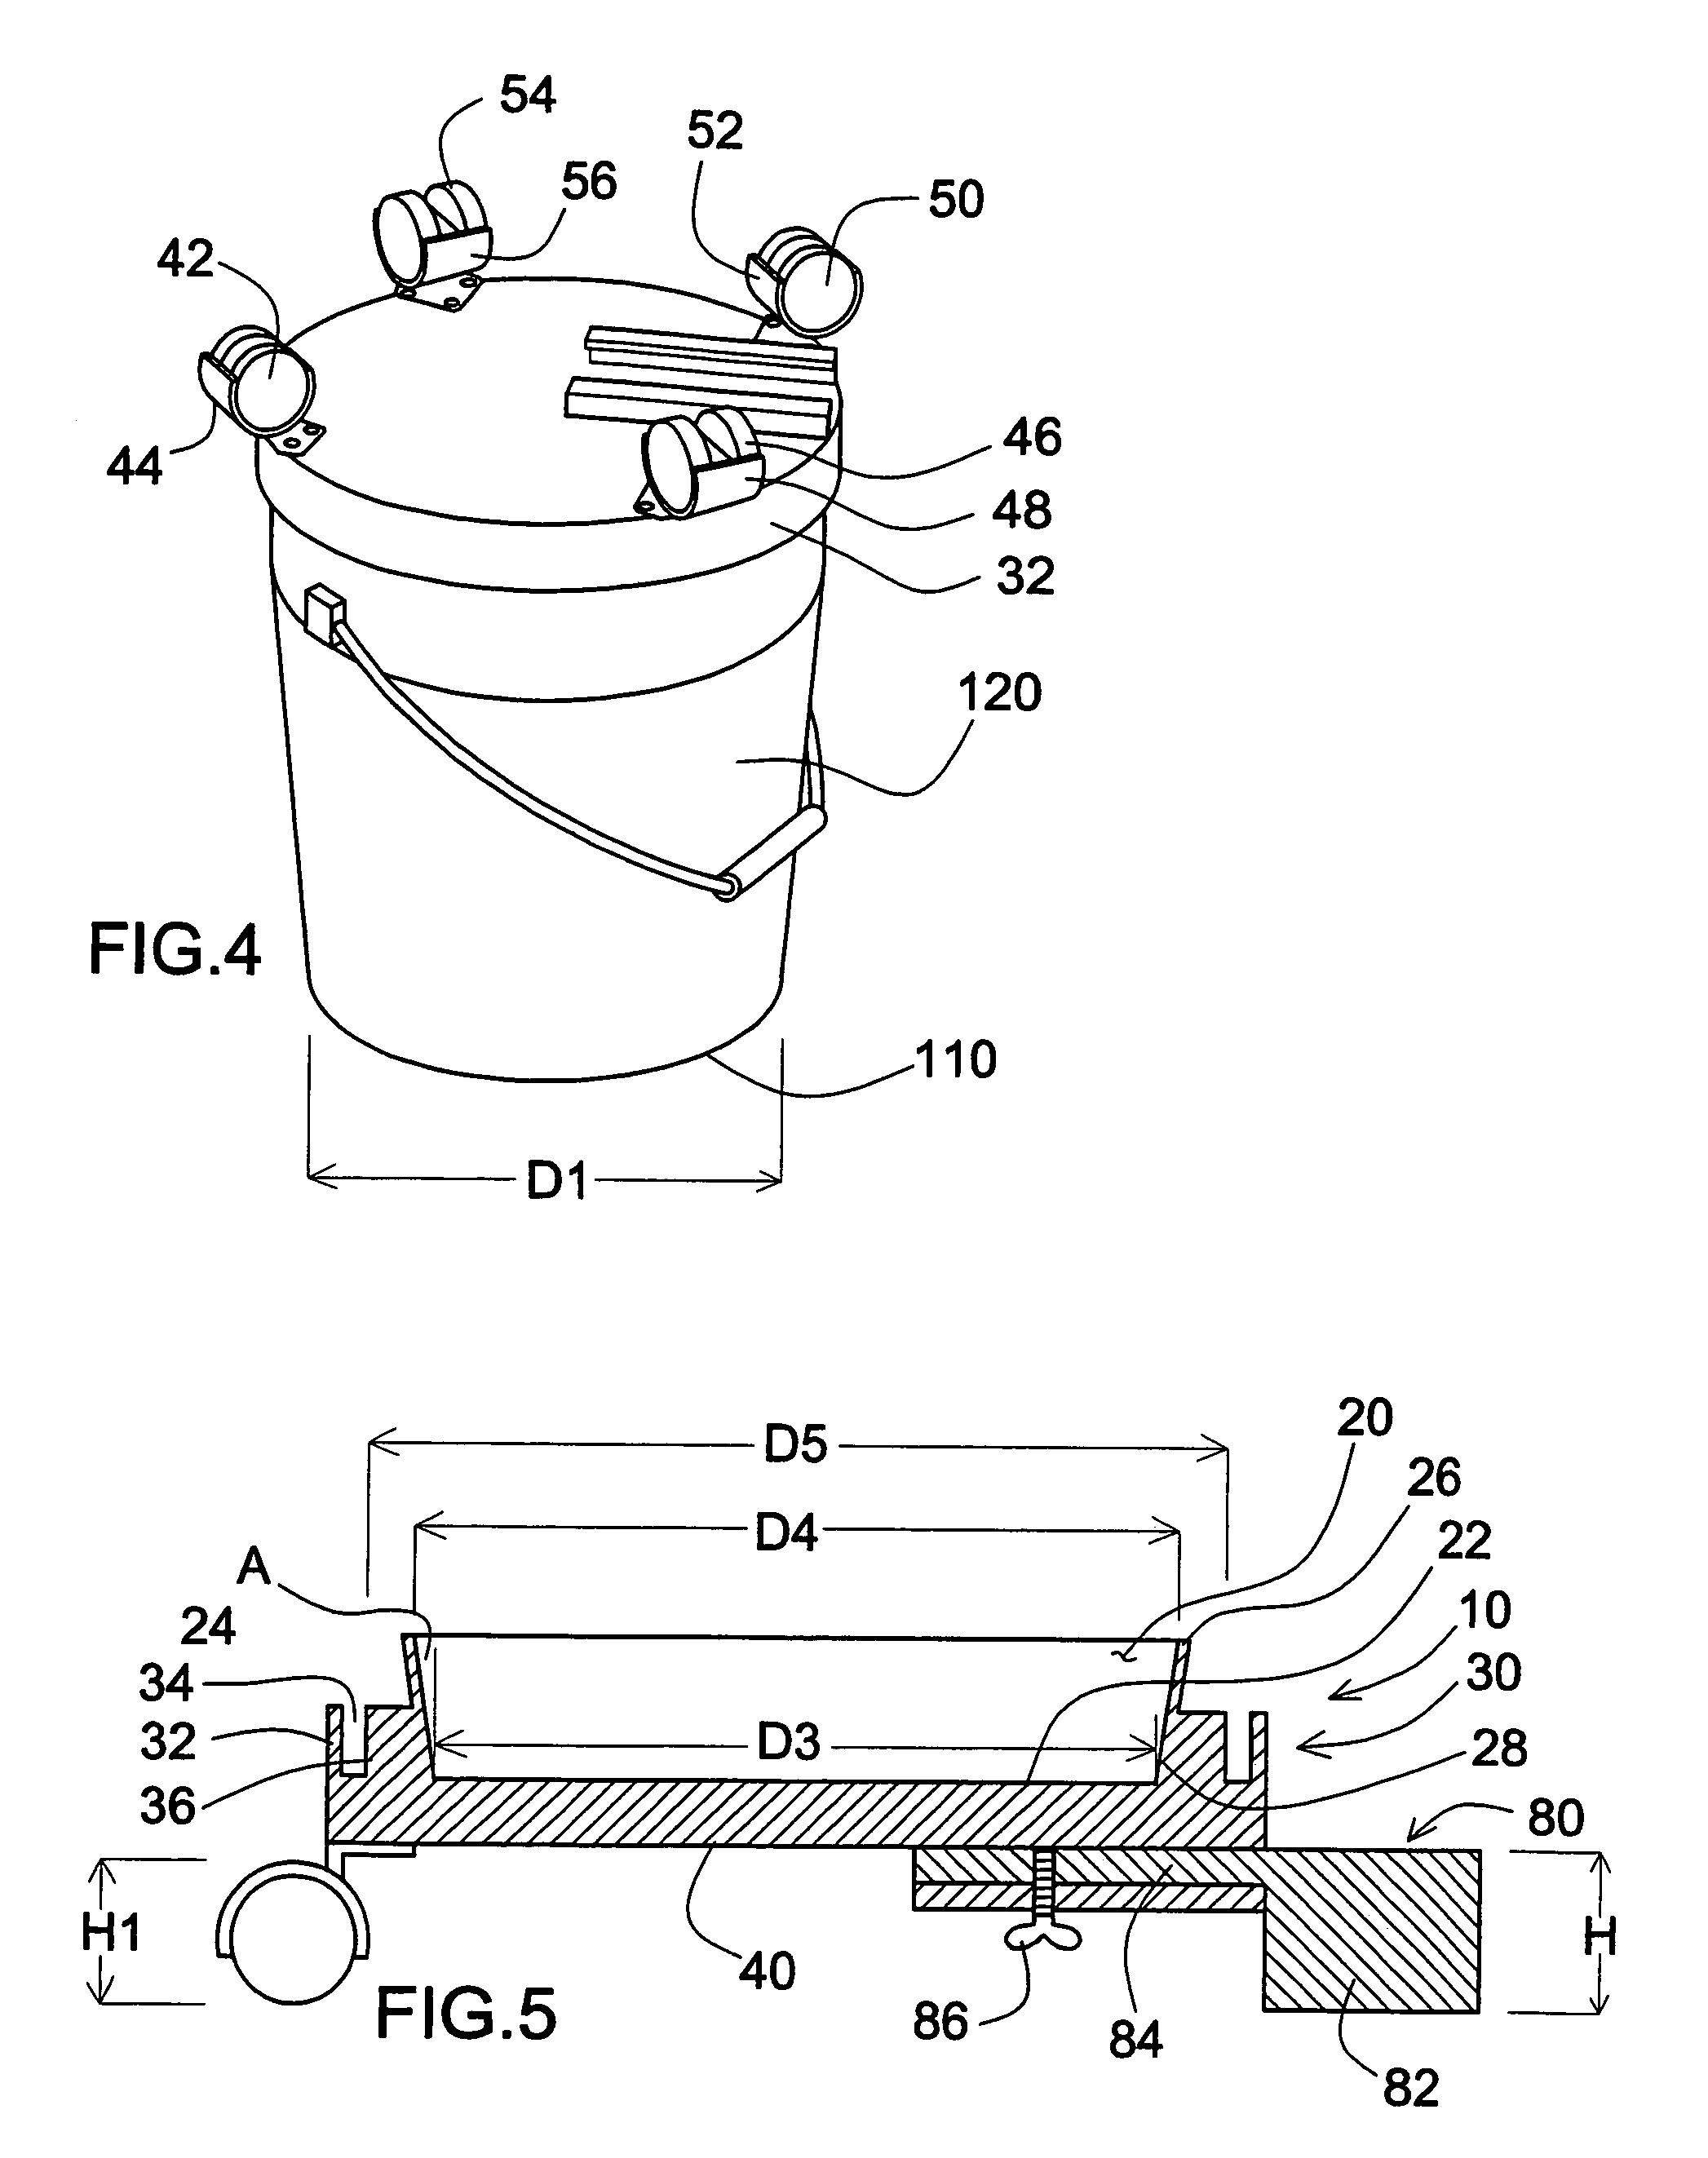 Device for transforming a stationary bucket into a rolling bucket, functioning as a lid, and also facilitating attachment of a substance removal device